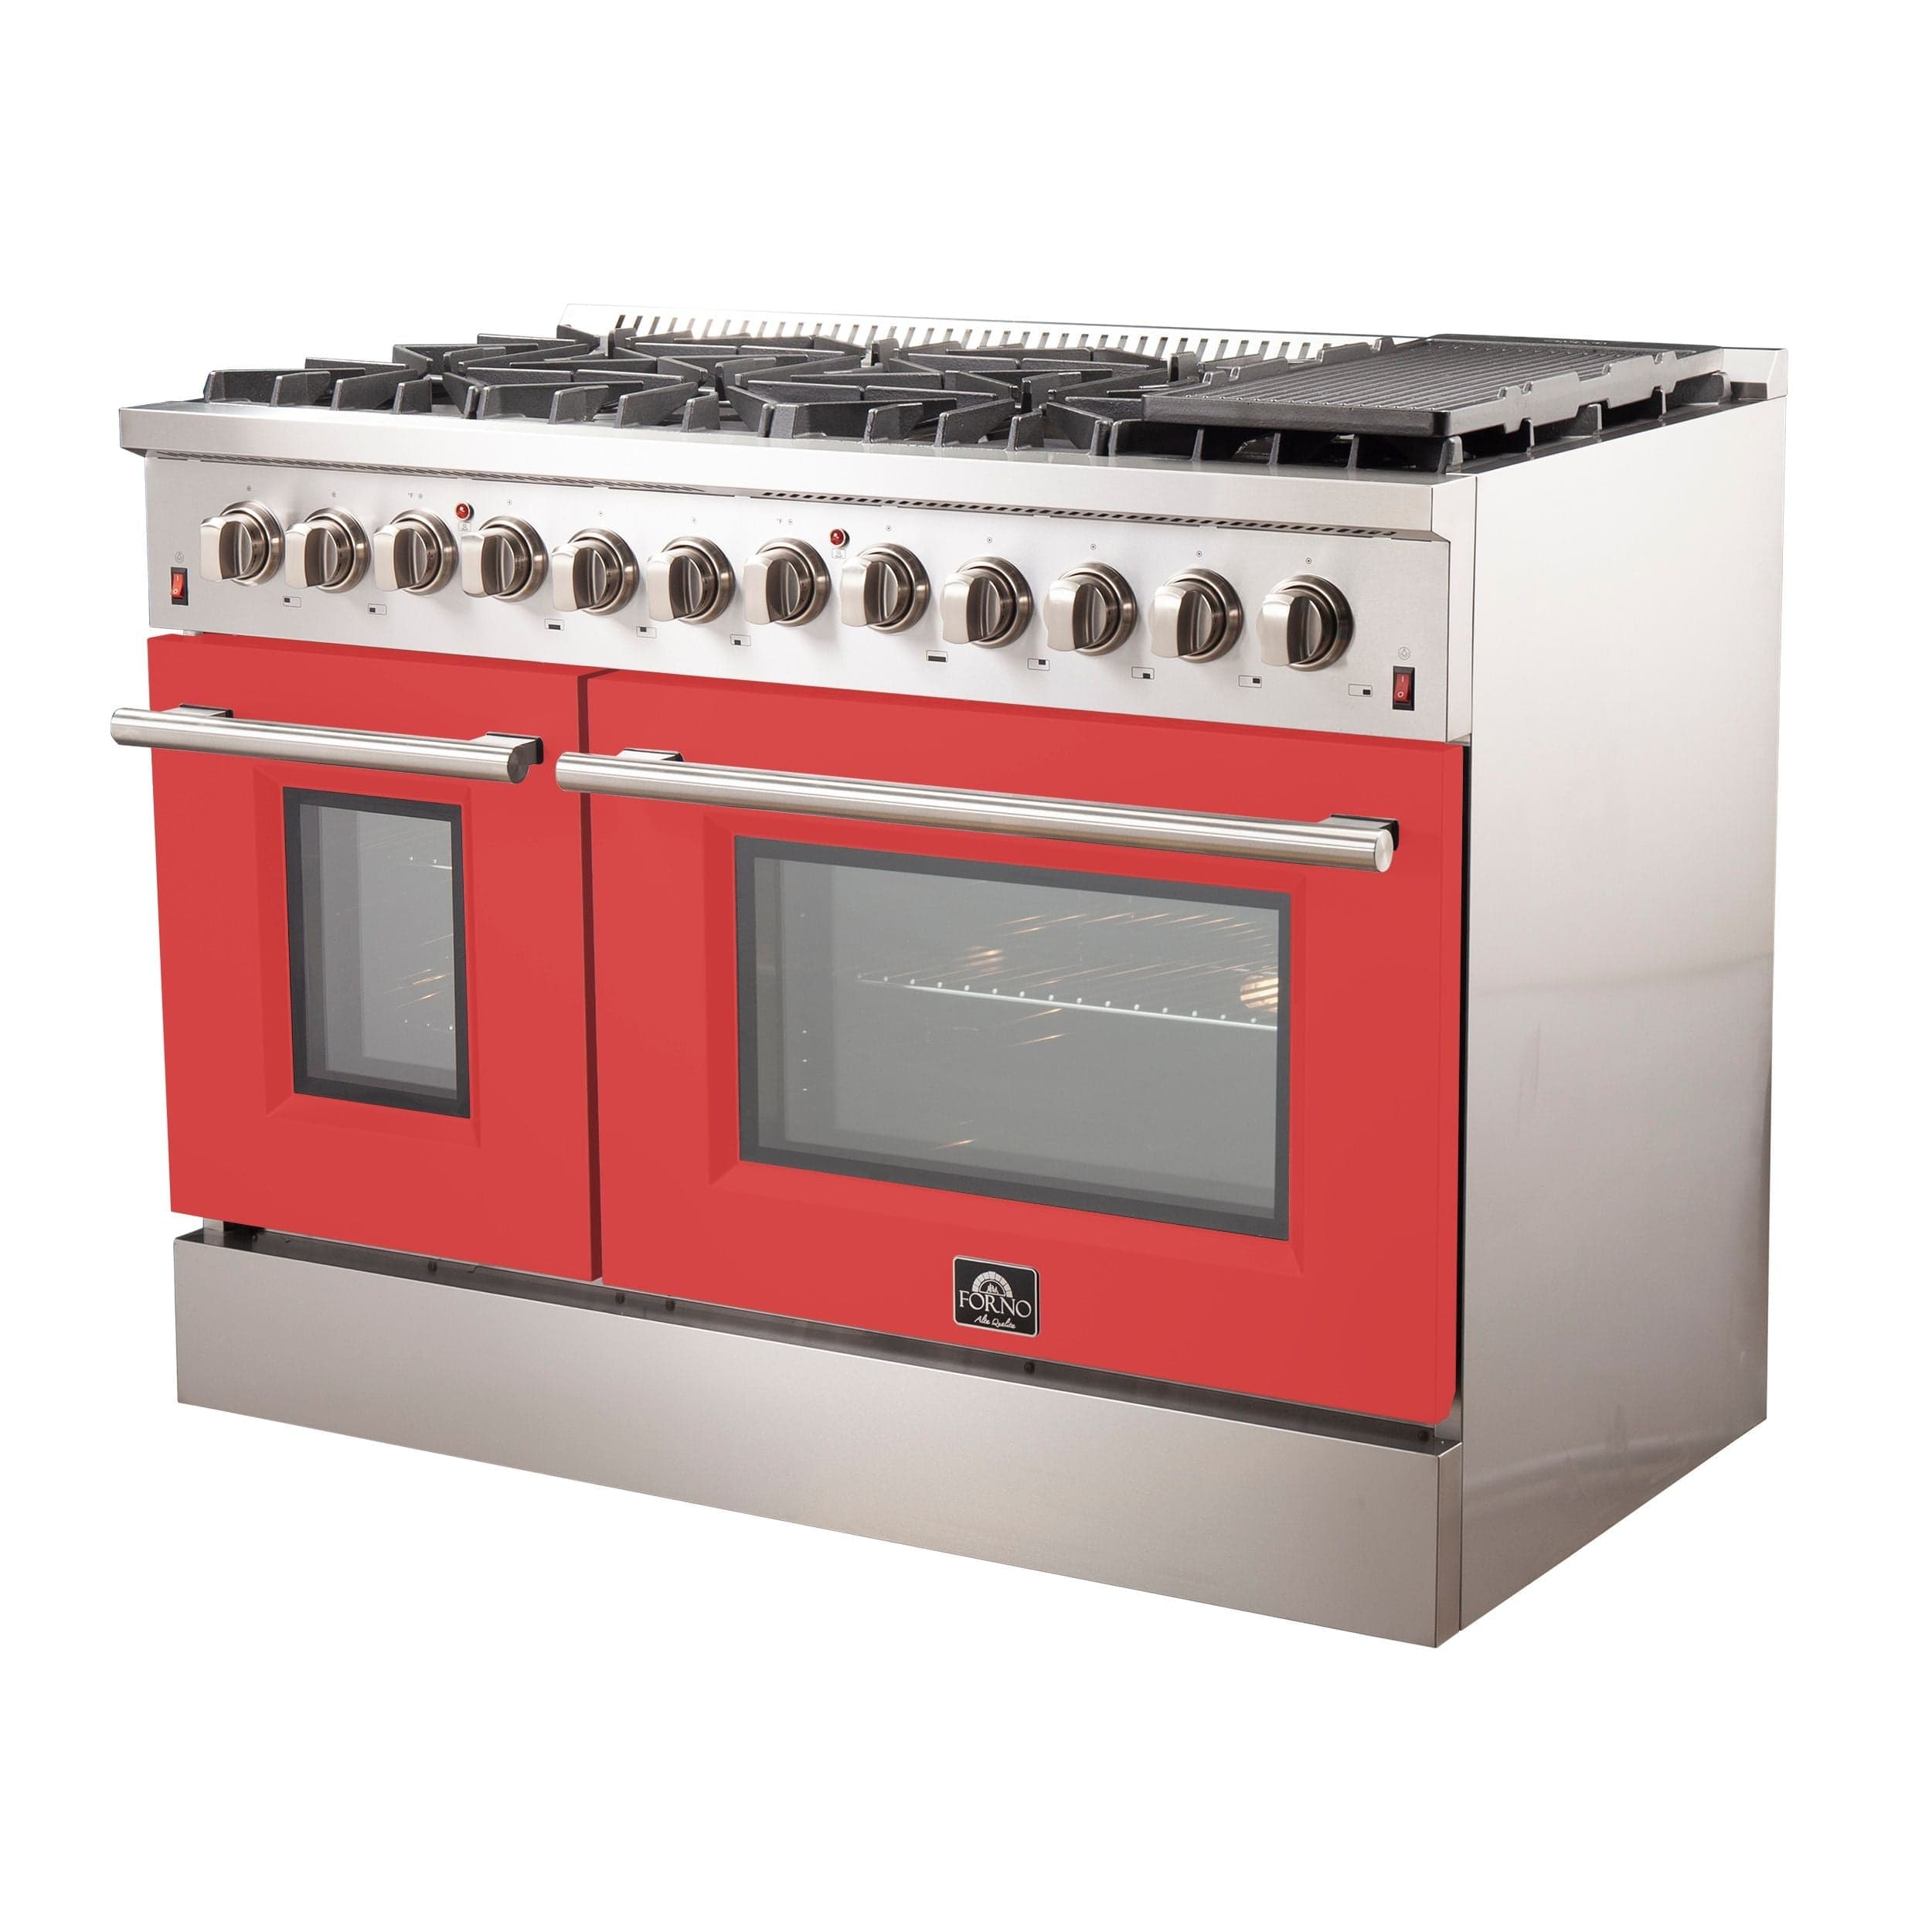 Forno 48 Inch Professional Freestanding Dual Fuel Range in Red, FFSGS6156-48RED Range FFSGS6156-48RED Luxury Appliances Direct